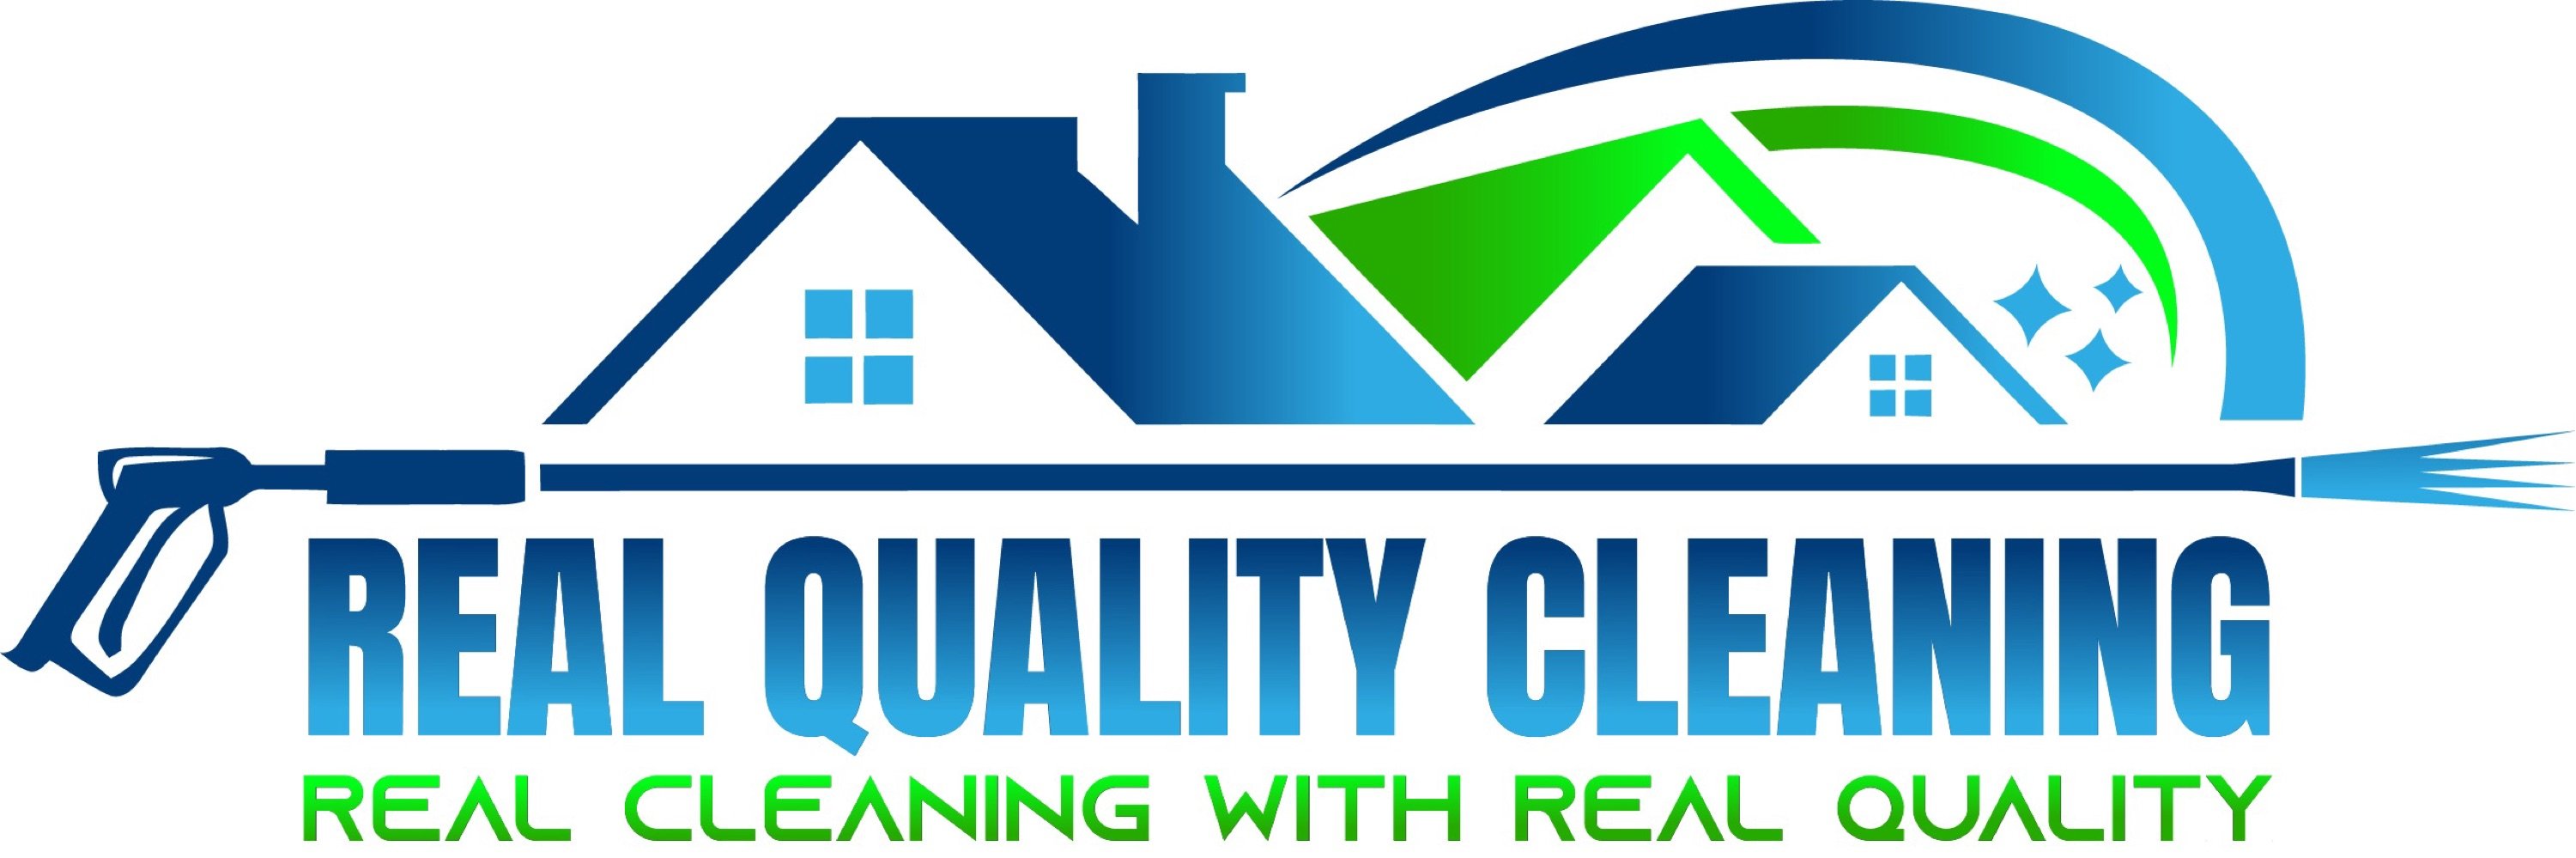 Real Quality Cleaning Logo